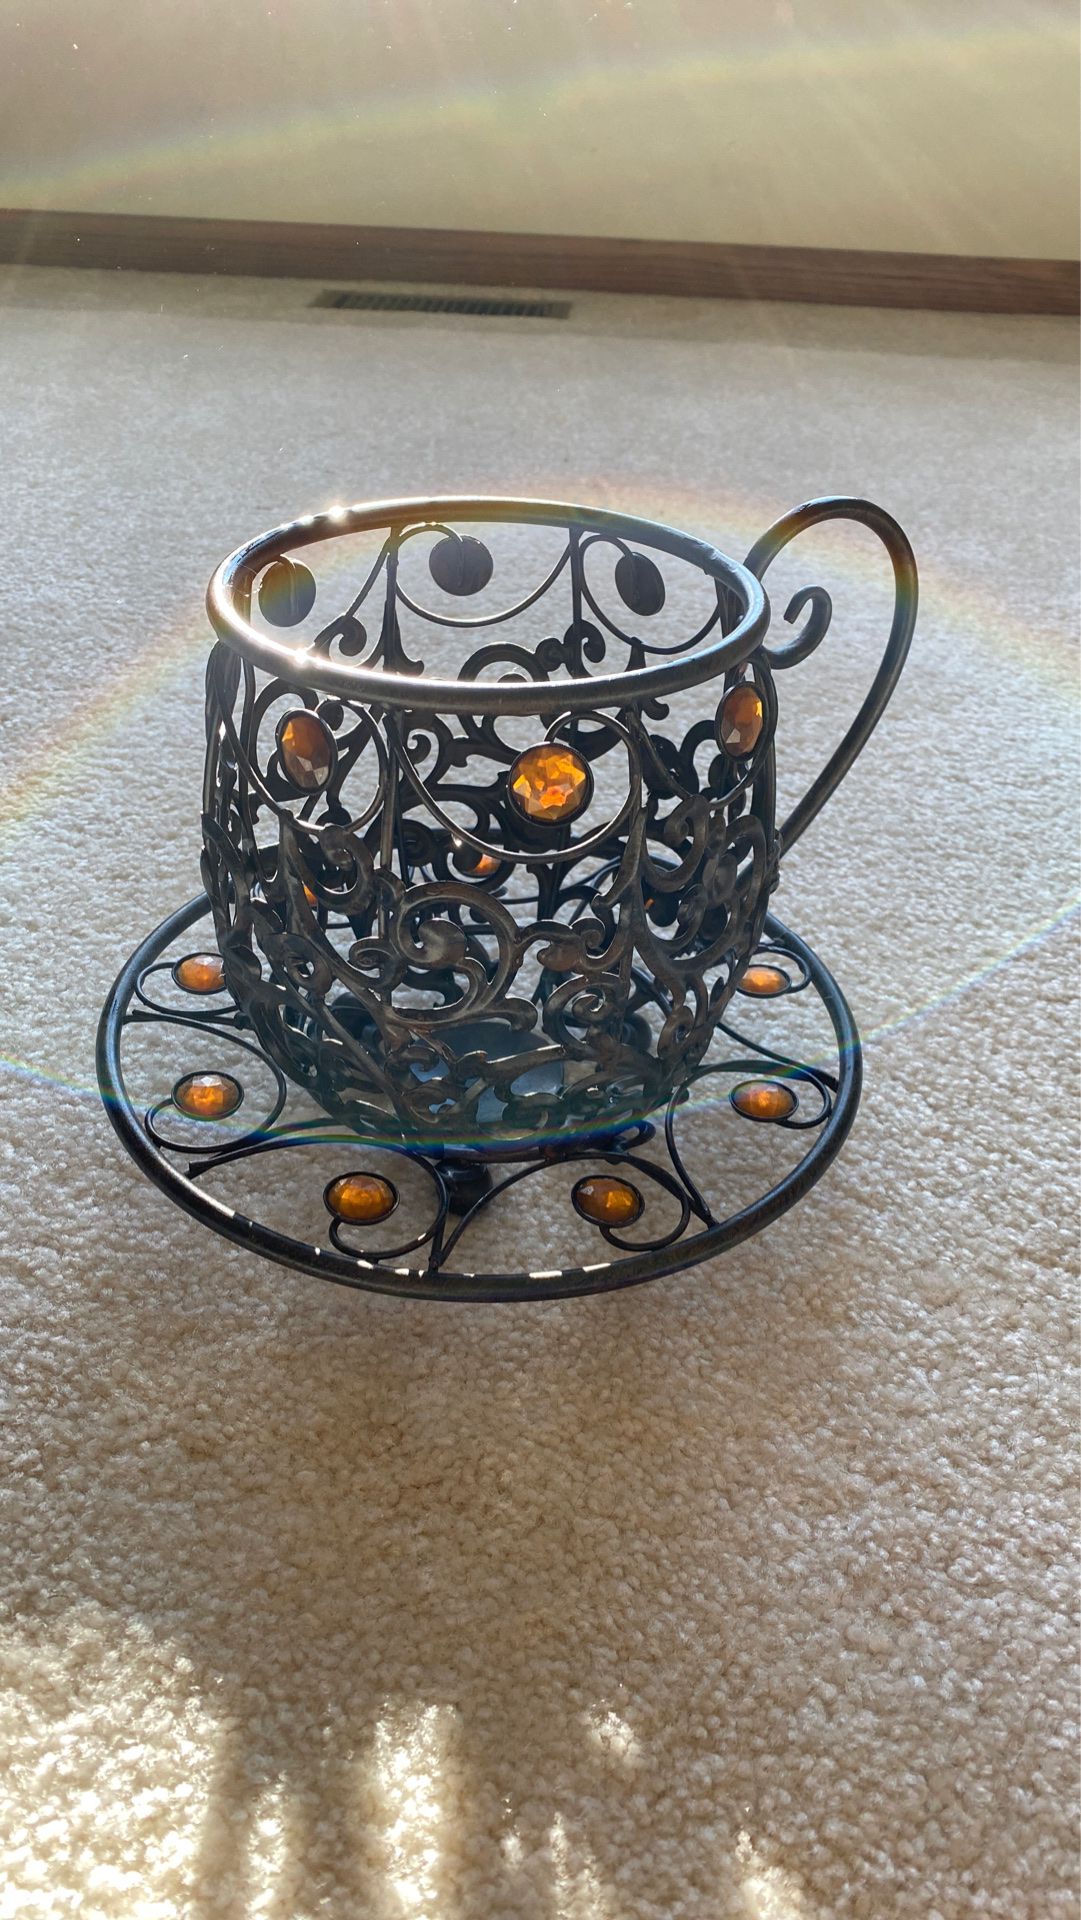 Decorative Jeweled Cup Shape Keurig Cup holder